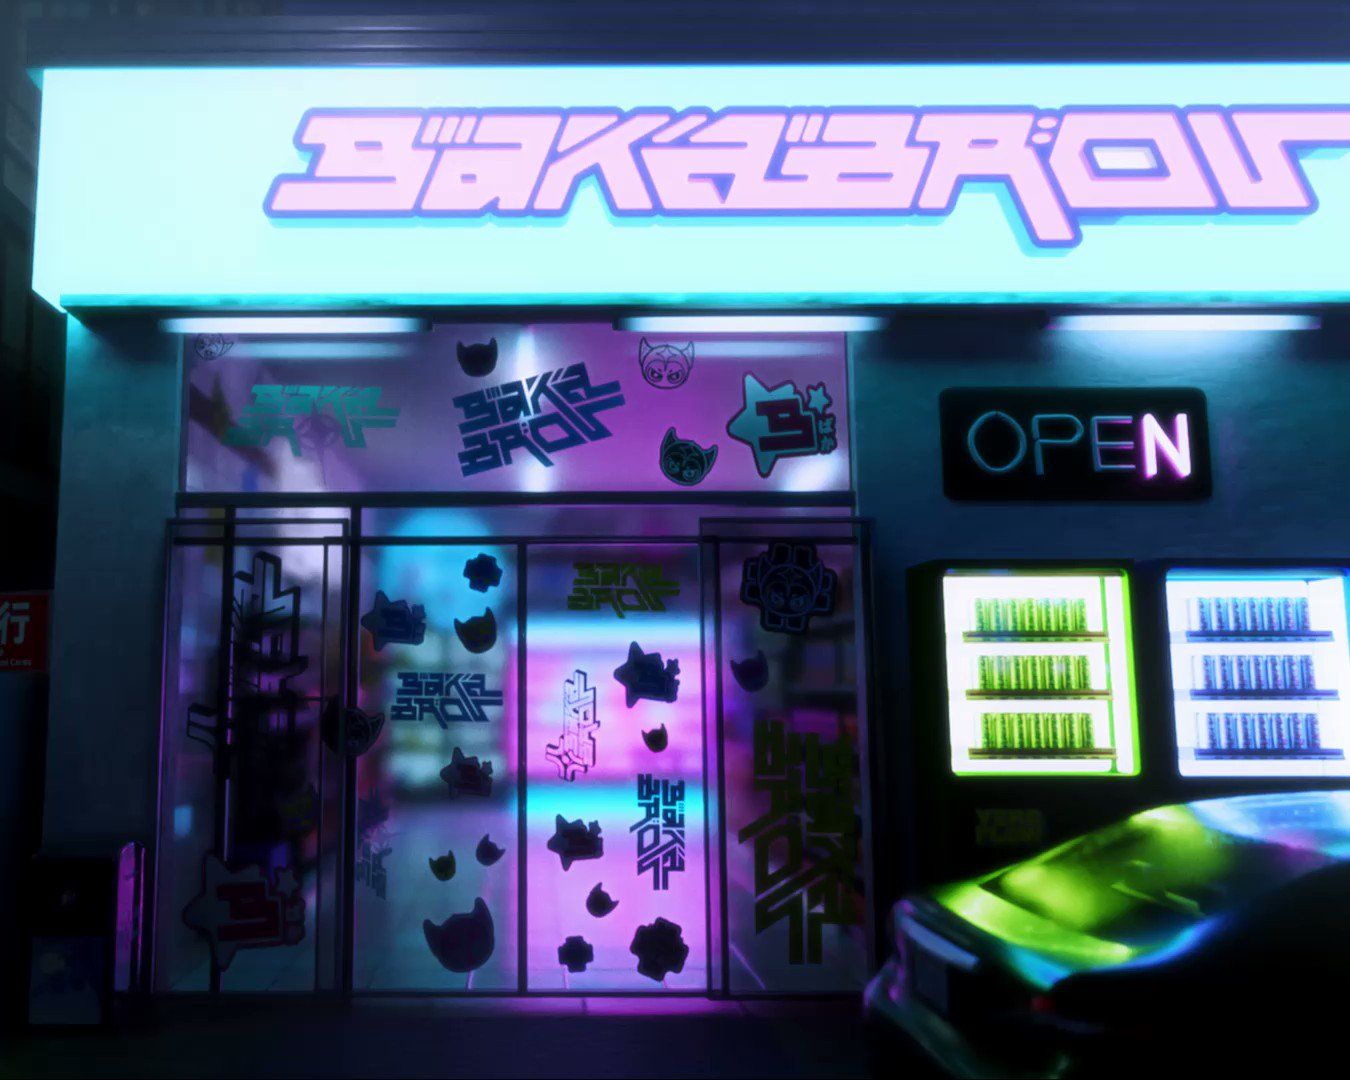 A futuristic convenience store with a neon sign that says 